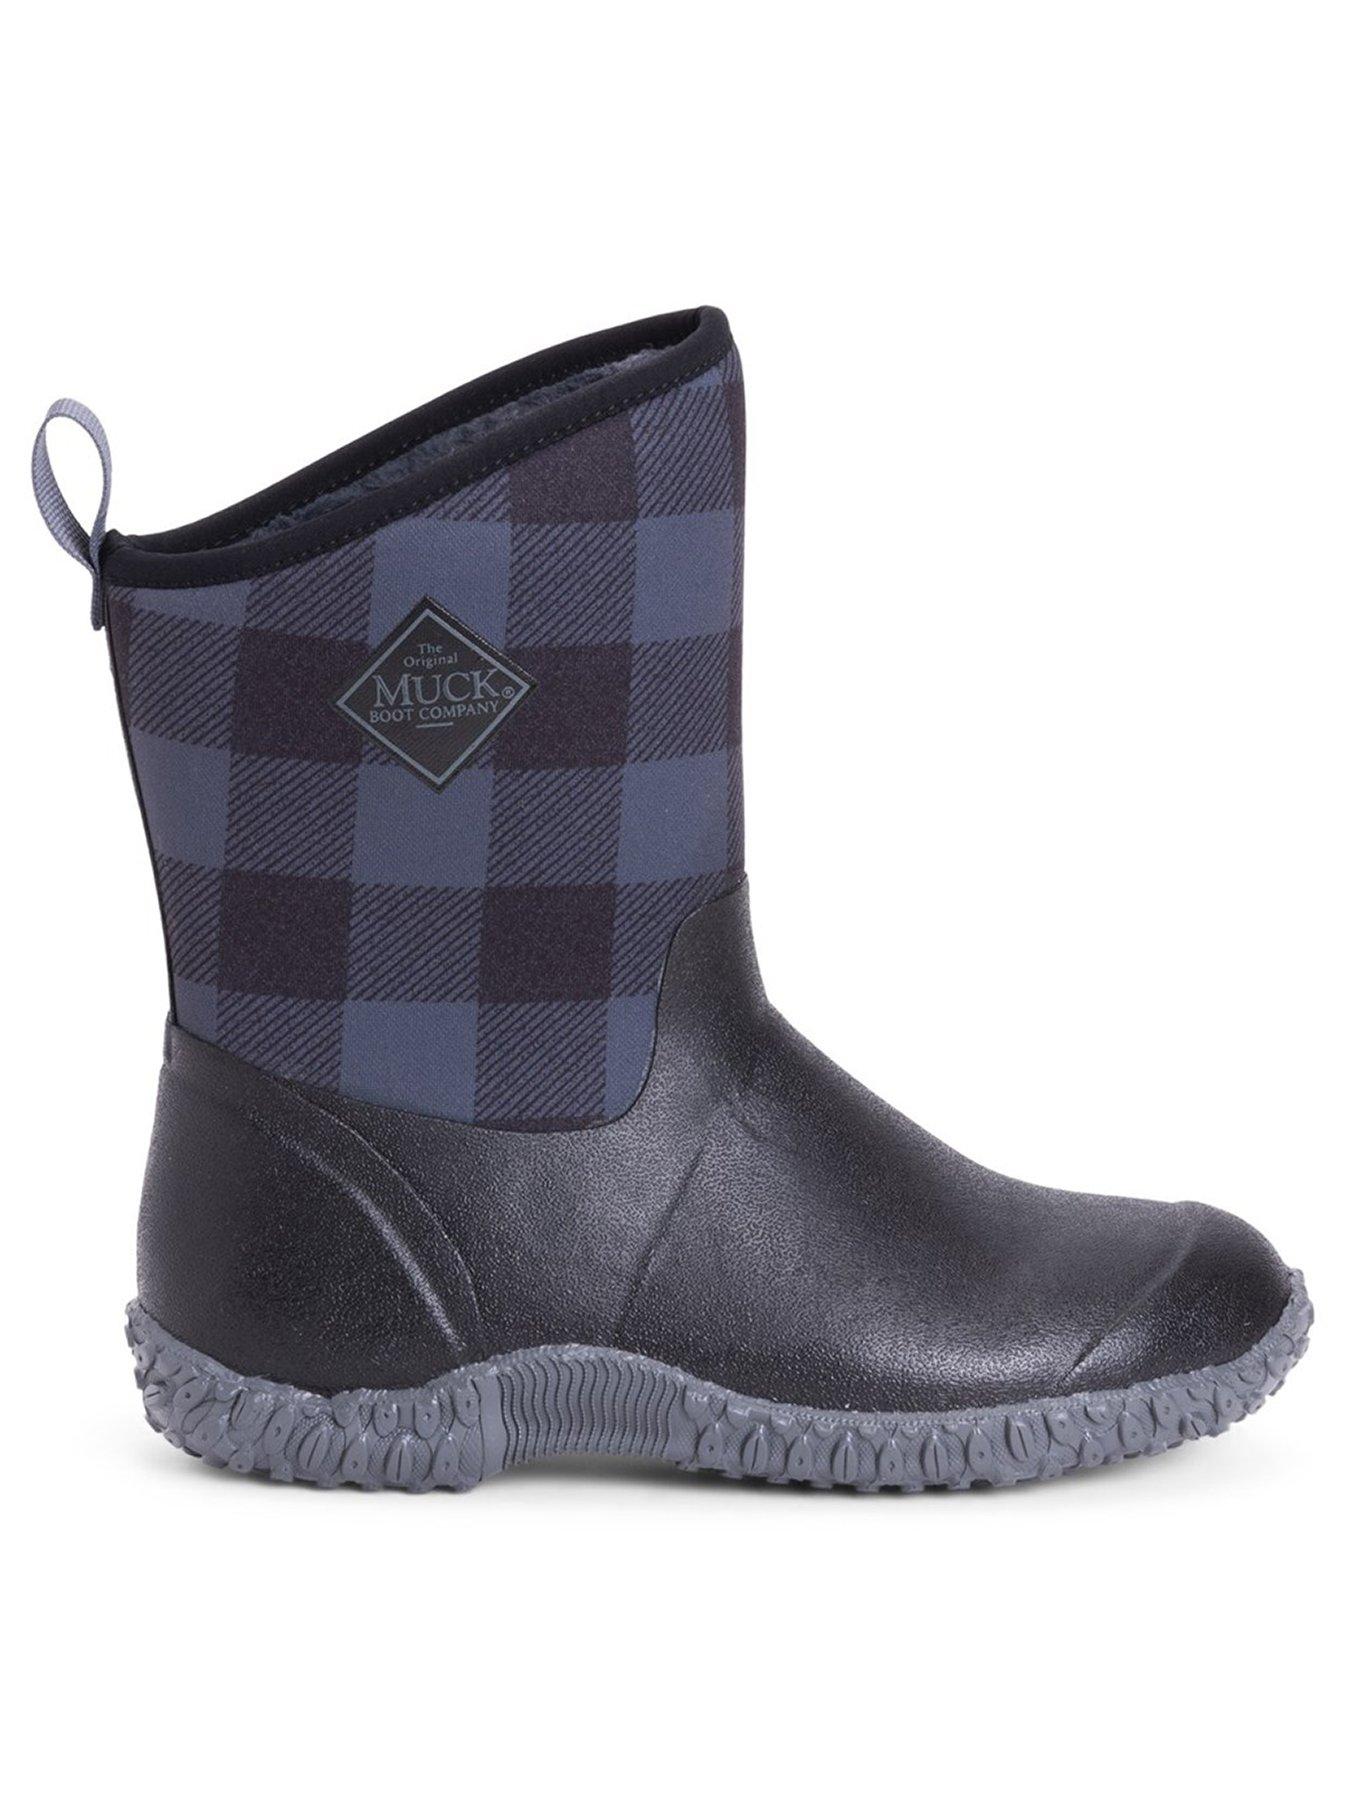 Muck Boots Muckster Mid Print Wellington Boots - Black/Grey | very.co.uk